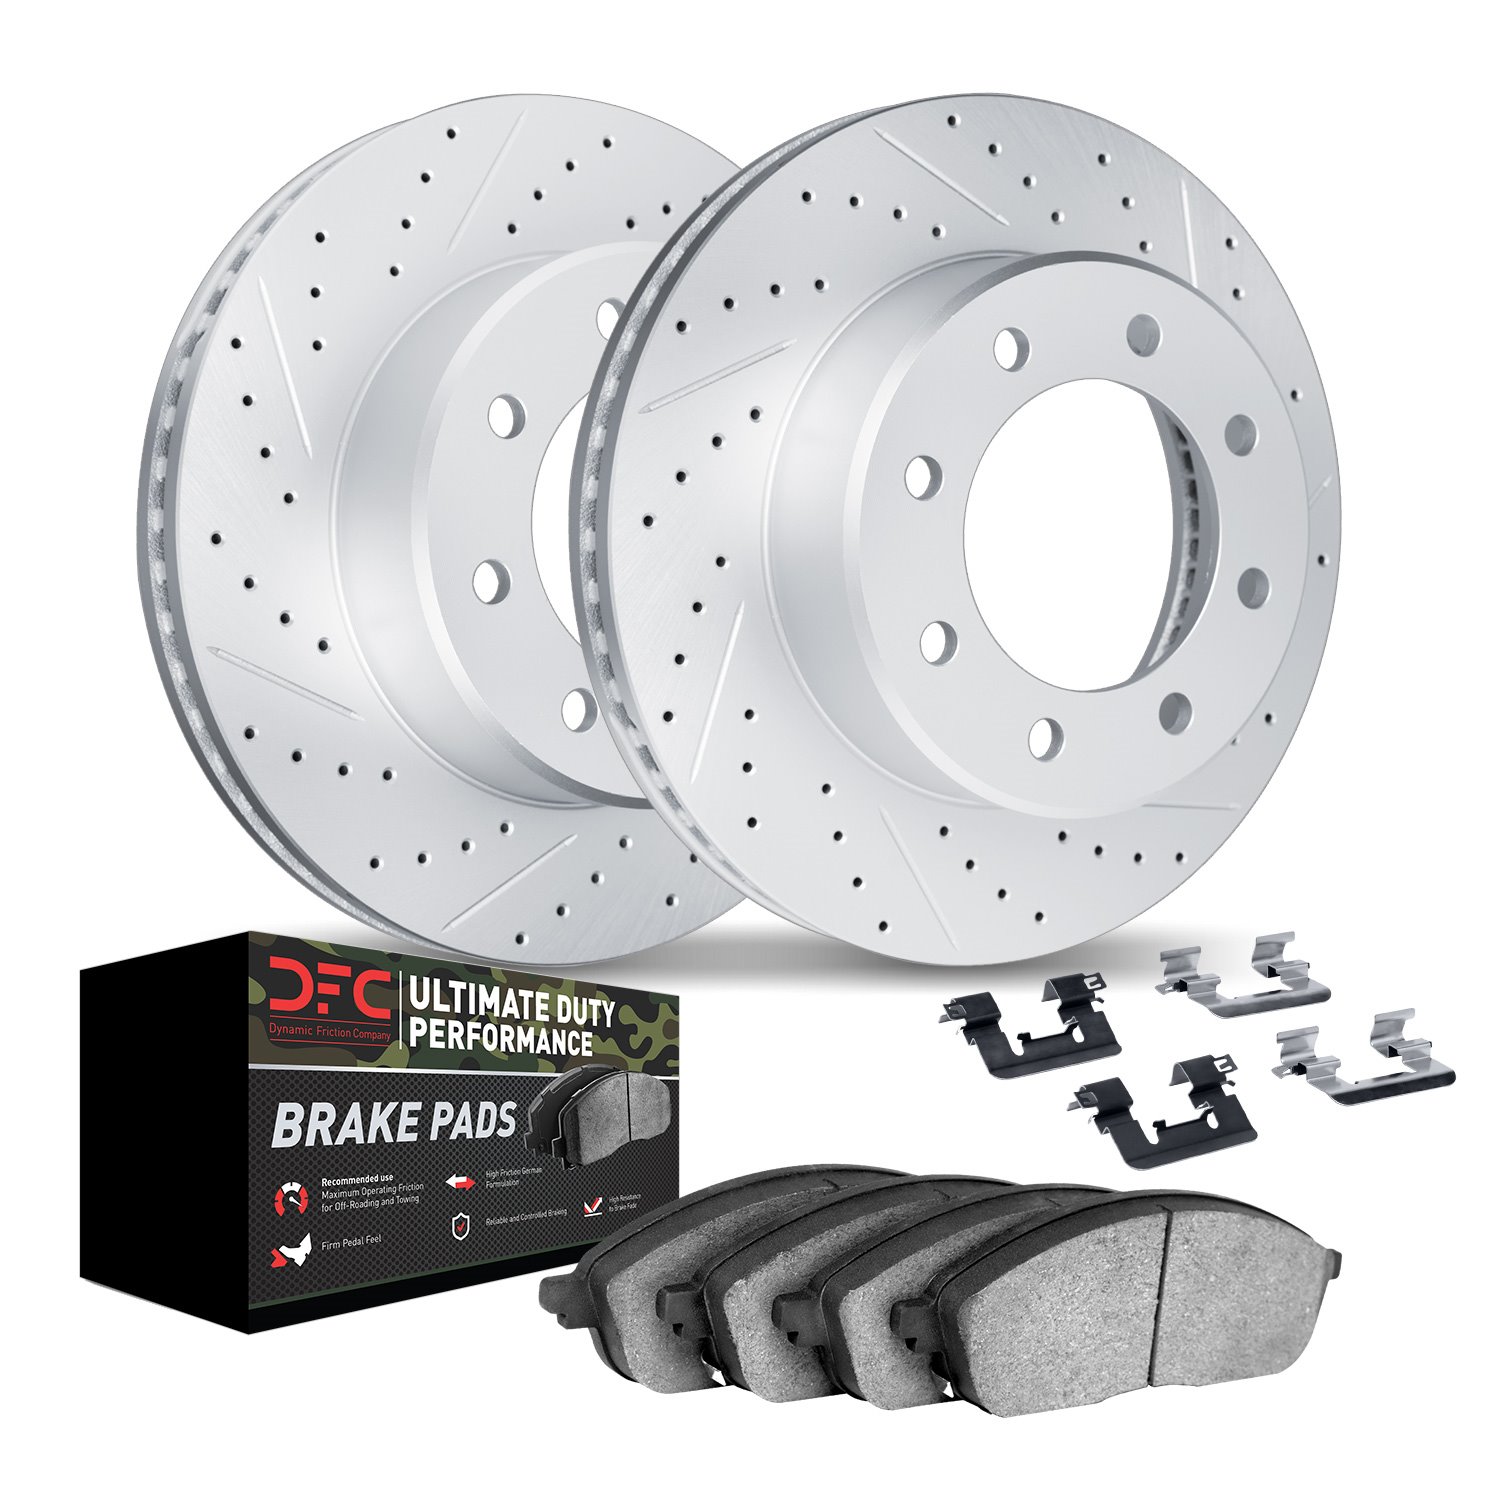 2412-54060 Geoperformance Drilled/Slotted Brake Rotors with Ultimate-Duty Brake Pads Kit & Hardware, 2010-2012 Ford/Lincoln/Merc